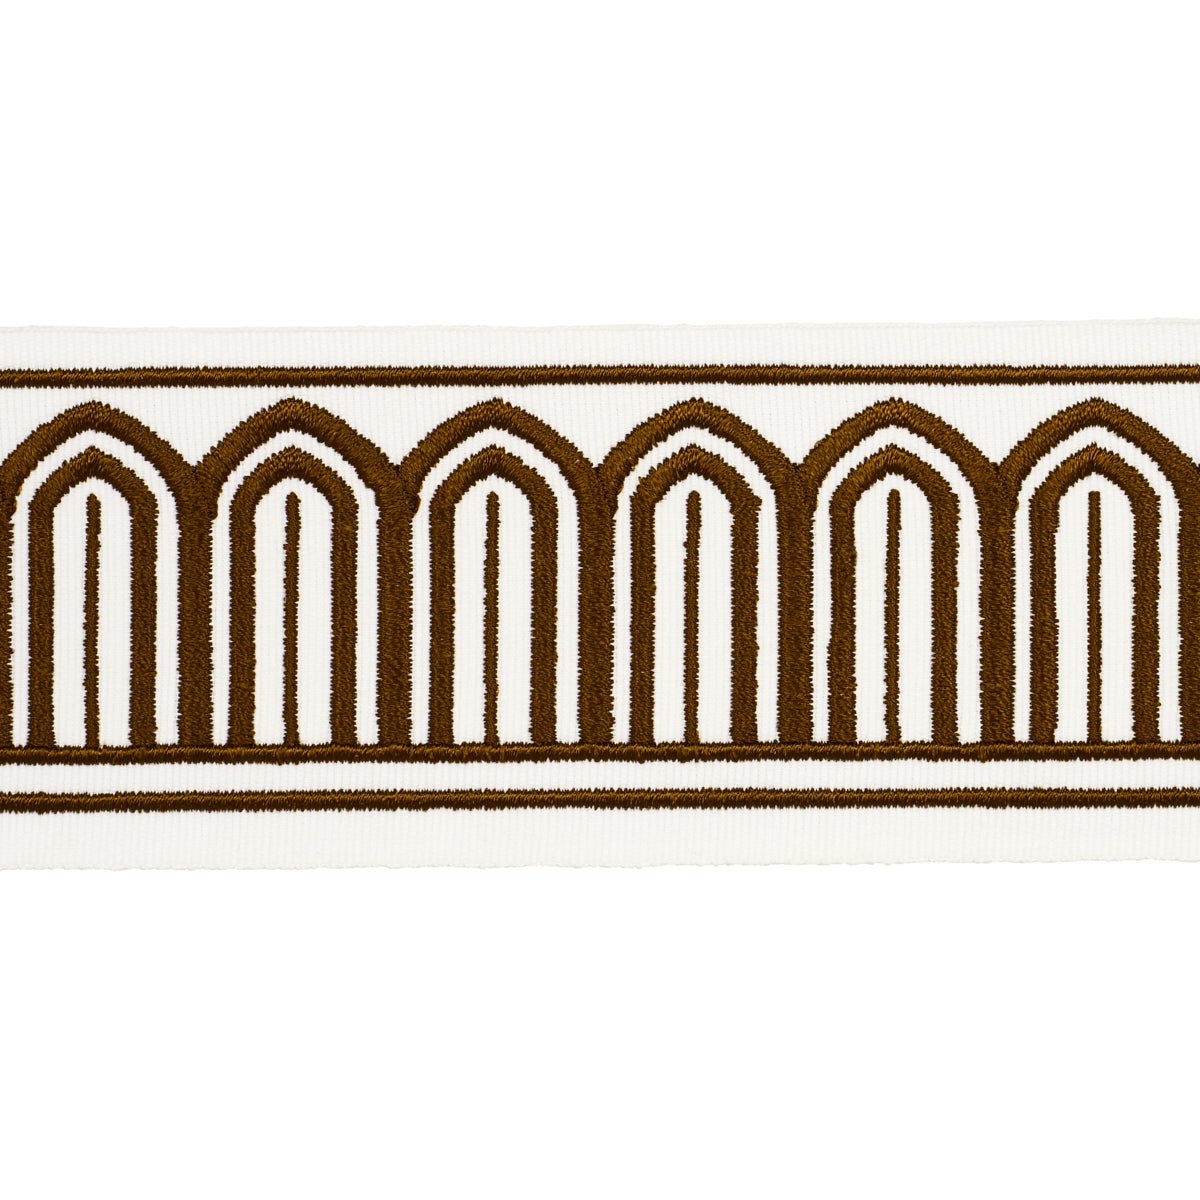 ARCHES EMBROIDERED TAPE MEDIUM | BROWN